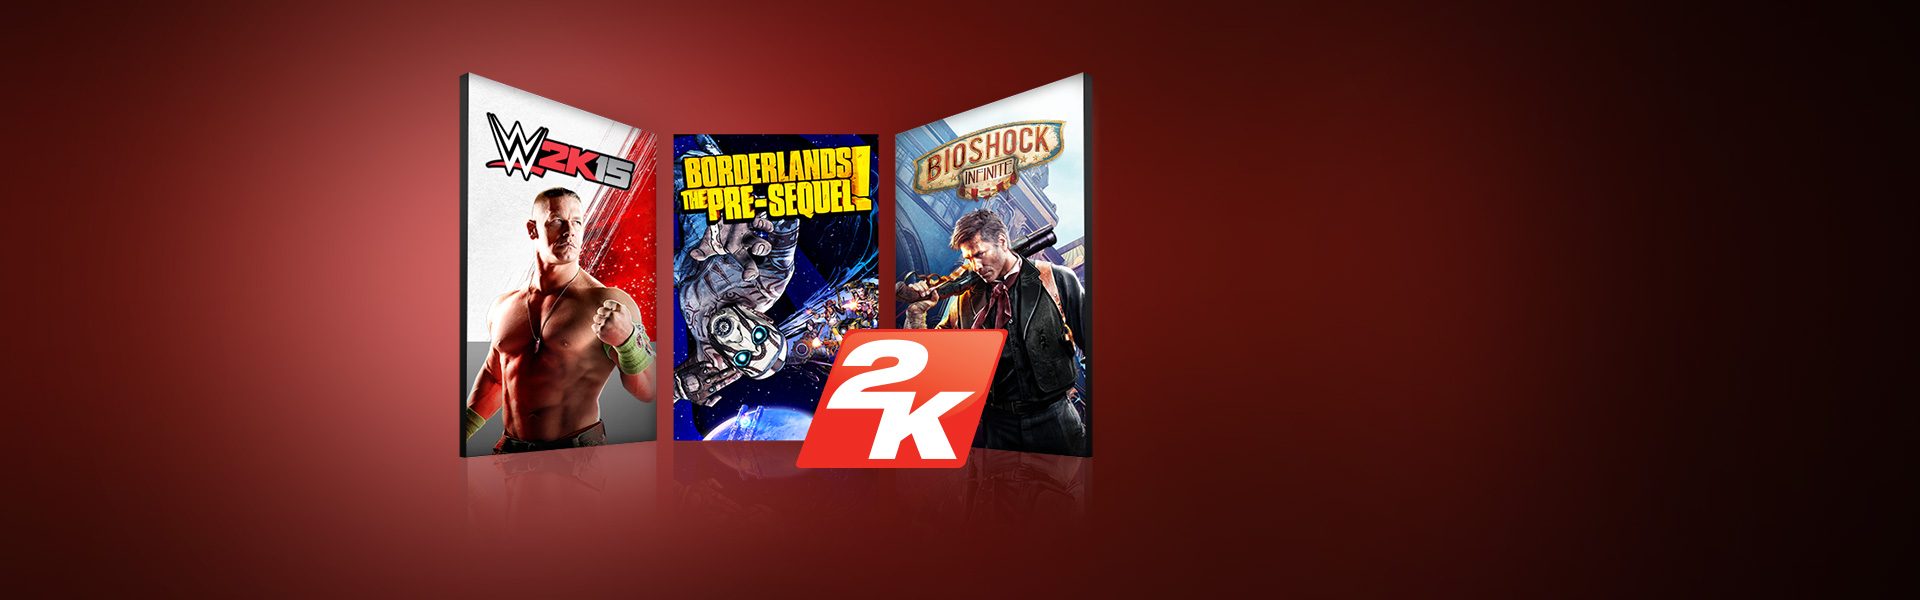 playstation store special offers